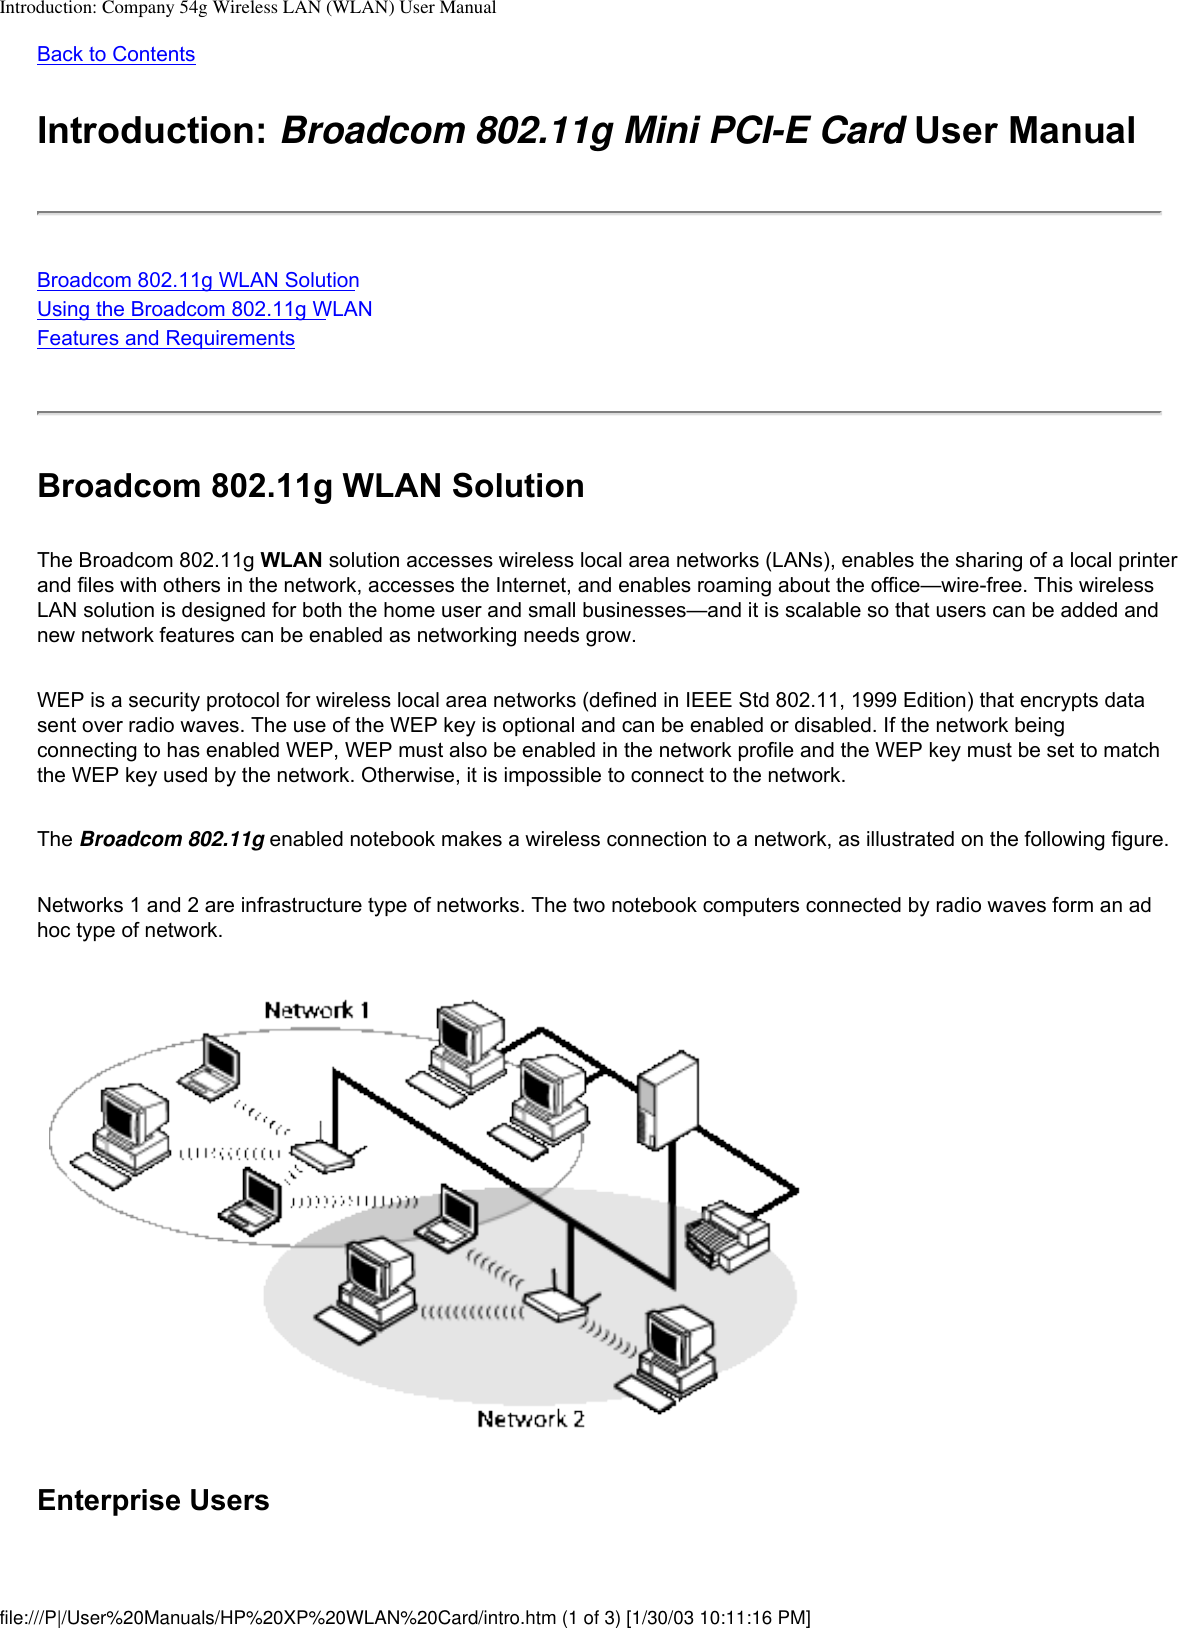 Introduction: Company 54g Wireless LAN (WLAN) User ManualBack to ContentsIntroduction: Broadcom 802.11g Mini PCI-E Card User ManualBroadcom 802.11g WLAN SolutionUsing the Broadcom 802.11g WLANFeatures and RequirementsBroadcom 802.11g WLAN SolutionThe Broadcom 802.11g WLAN solution accesses wireless local area networks (LANs), enables the sharing of a local printer and files with others in the network, accesses the Internet, and enables roaming about the office—wire-free. This wireless LAN solution is designed for both the home user and small businesses—and it is scalable so that users can be added and new network features can be enabled as networking needs grow.WEP is a security protocol for wireless local area networks (defined in IEEE Std 802.11, 1999 Edition) that encrypts data sent over radio waves. The use of the WEP key is optional and can be enabled or disabled. If the network being connecting to has enabled WEP, WEP must also be enabled in the network profile and the WEP key must be set to match the WEP key used by the network. Otherwise, it is impossible to connect to the network.The Broadcom 802.11g enabled notebook makes a wireless connection to a network, as illustrated on the following figure.Networks 1 and 2 are infrastructure type of networks. The two notebook computers connected by radio waves form an ad hoc type of network.Enterprise Usersfile:///P|/User%20Manuals/HP%20XP%20WLAN%20Card/intro.htm (1 of 3) [1/30/03 10:11:16 PM]